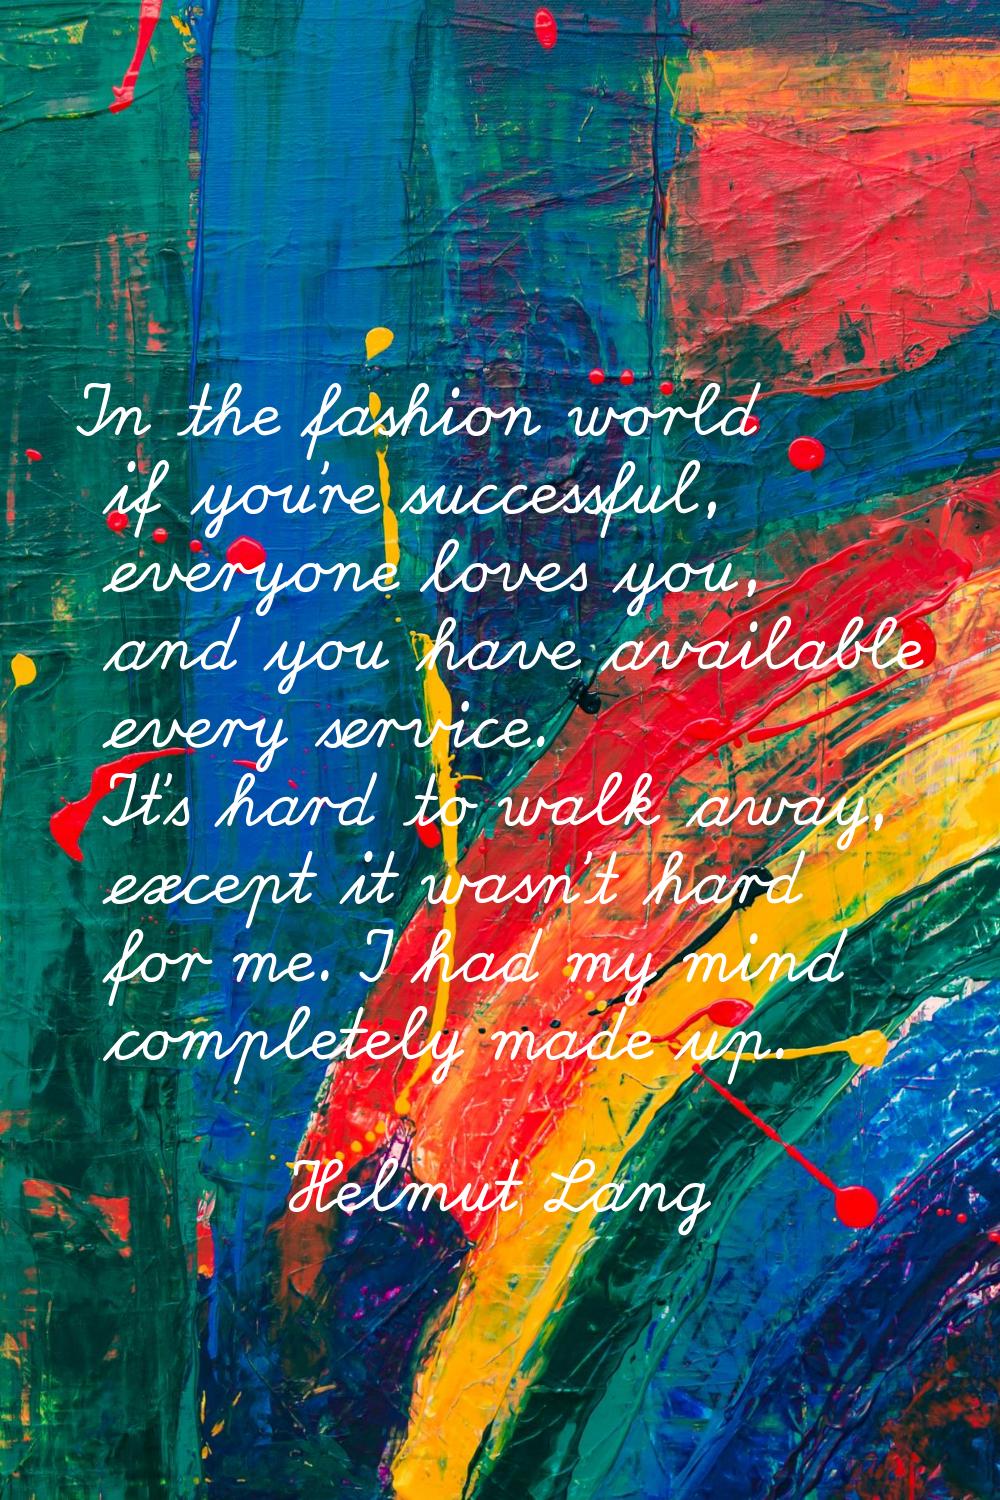 In the fashion world if you're successful, everyone loves you, and you have available every service